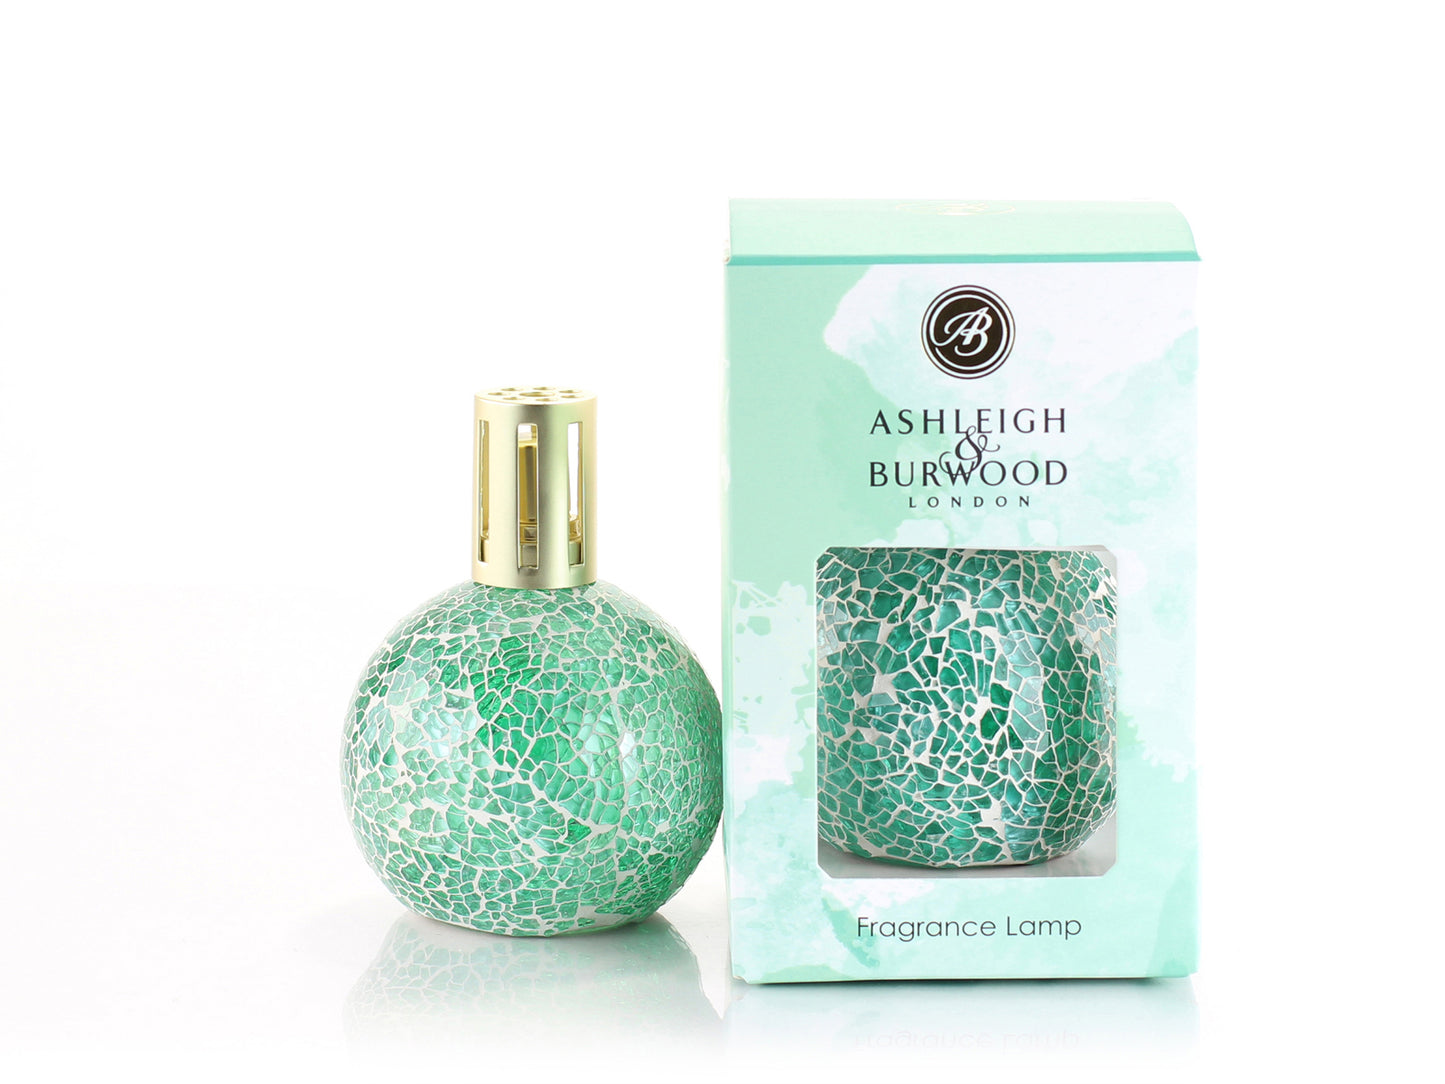 An aqua green fragrance lamp with a golden lid, made of pieces of glass embedded in a mosaic style